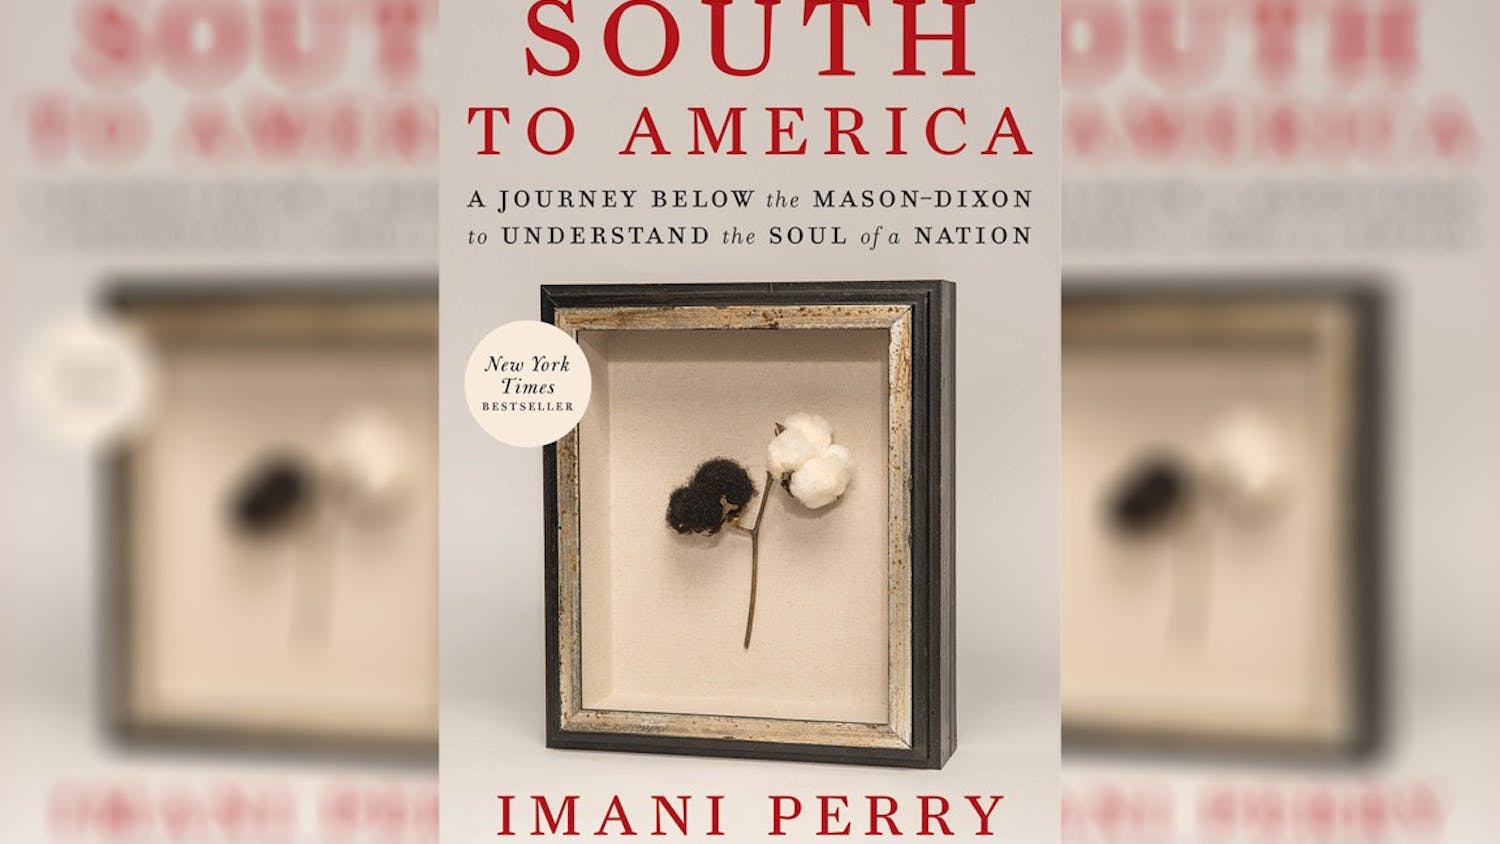 The cover of "South to America," a New York Times Bestseller book written by Imani Perry. The USC Humanities Collective hosted Perry for book talk on Tuesday, Feb 22, 2022.